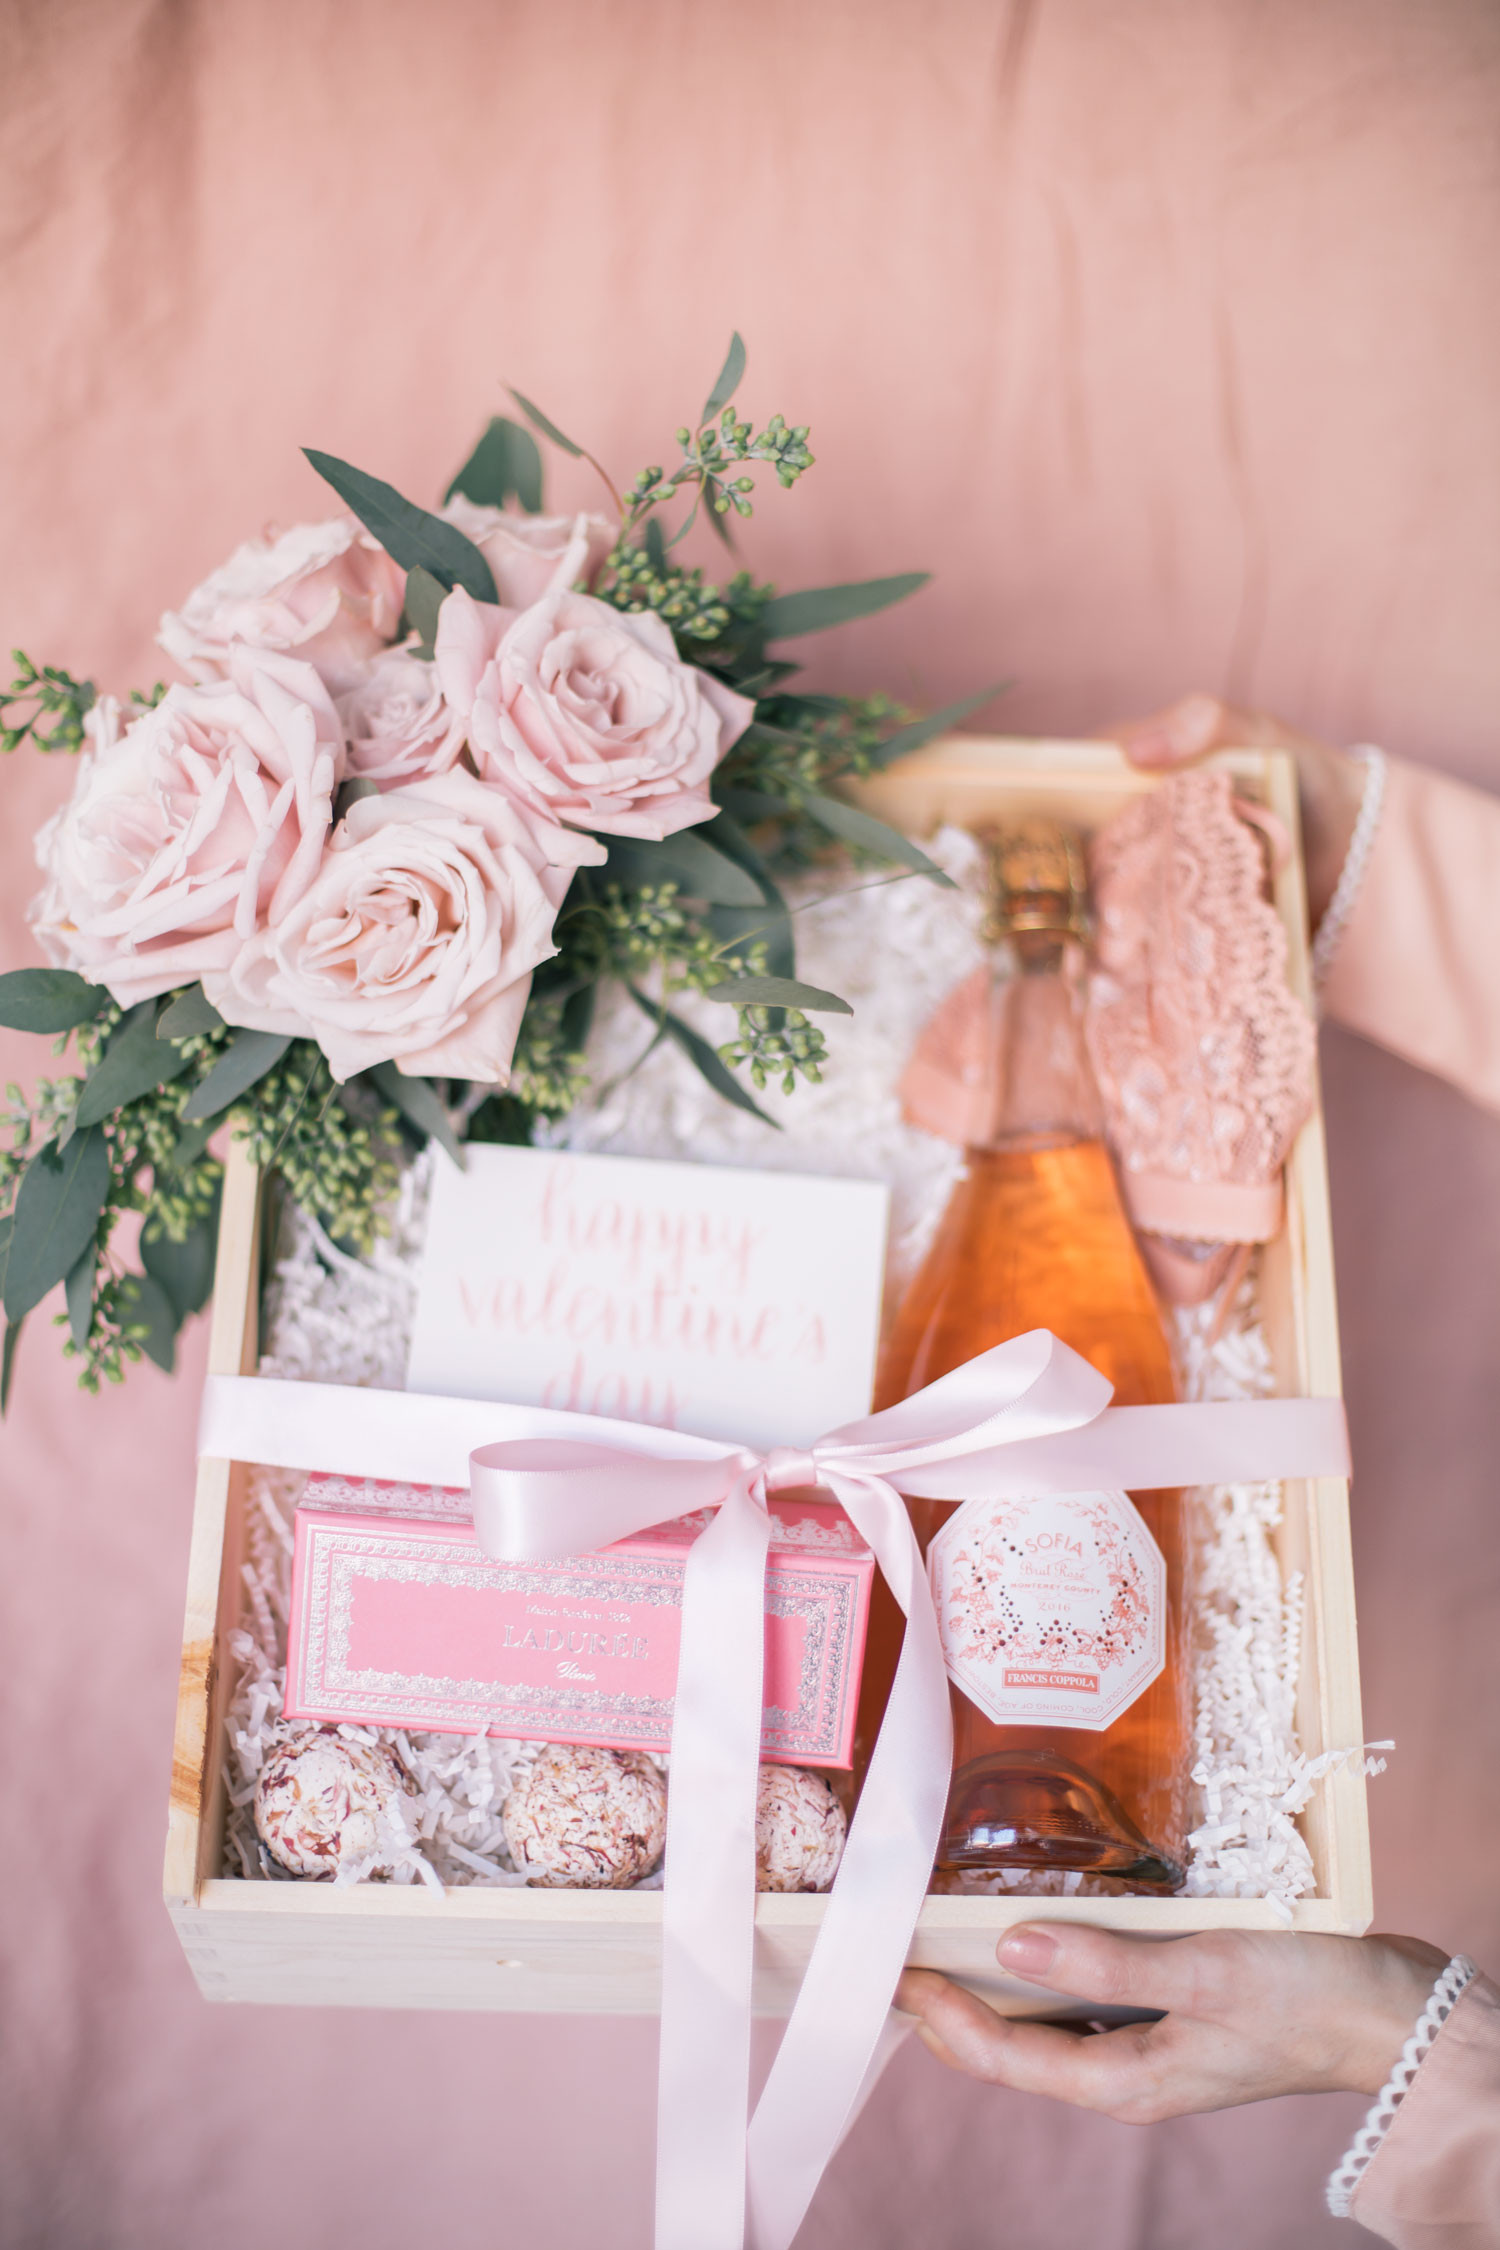 Valentines Day Gift Boxes
 The Prettiest DIY Valentine s Day Gift Box